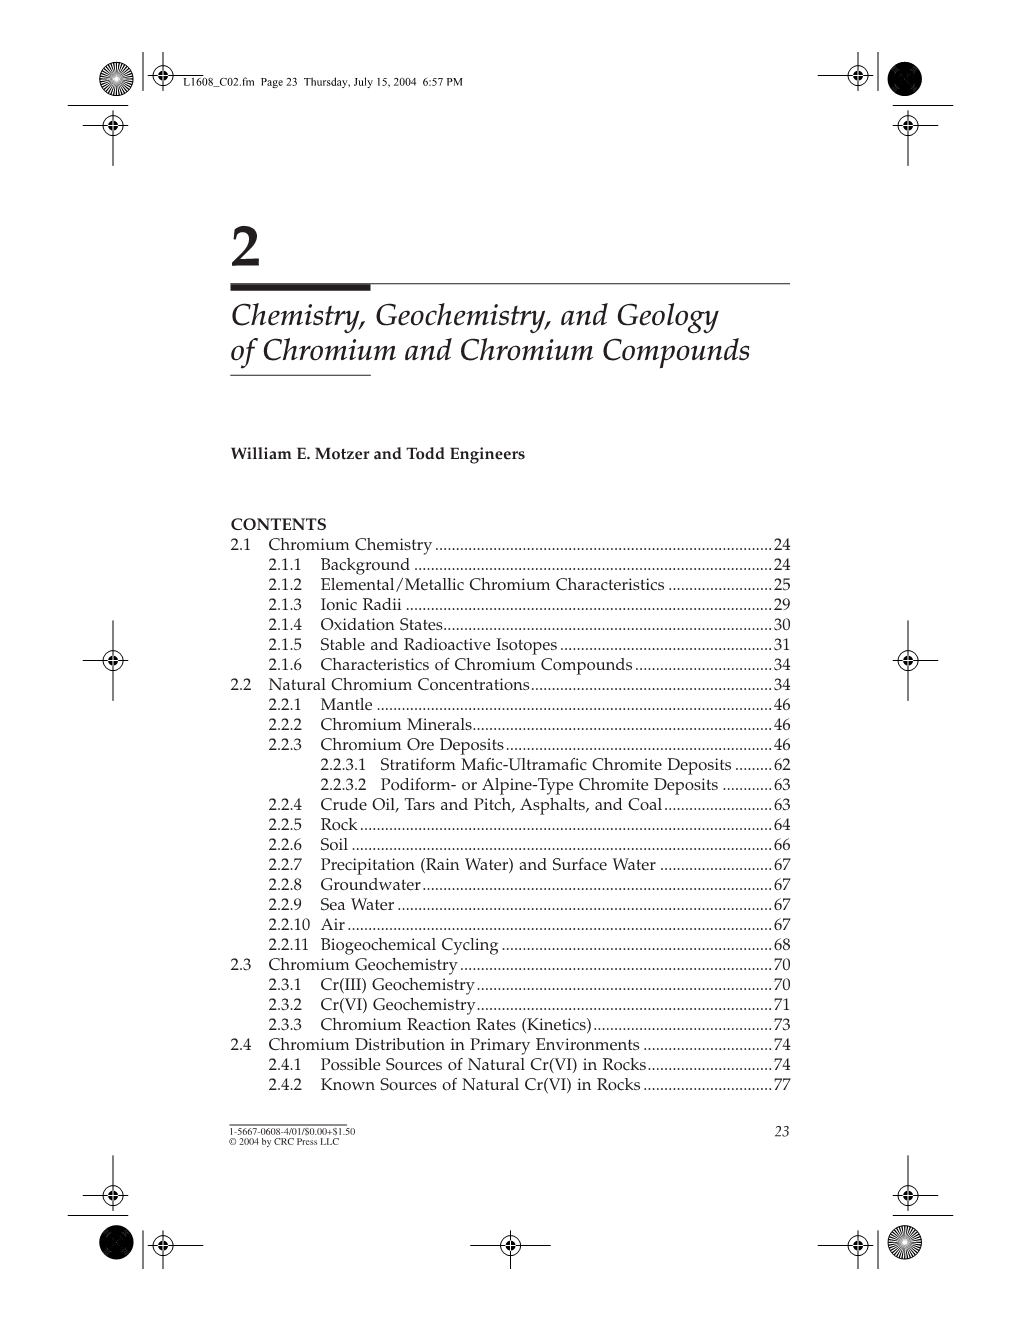 Chemistry, Geochemistry, and Geology of Chromium and Chromium Compounds